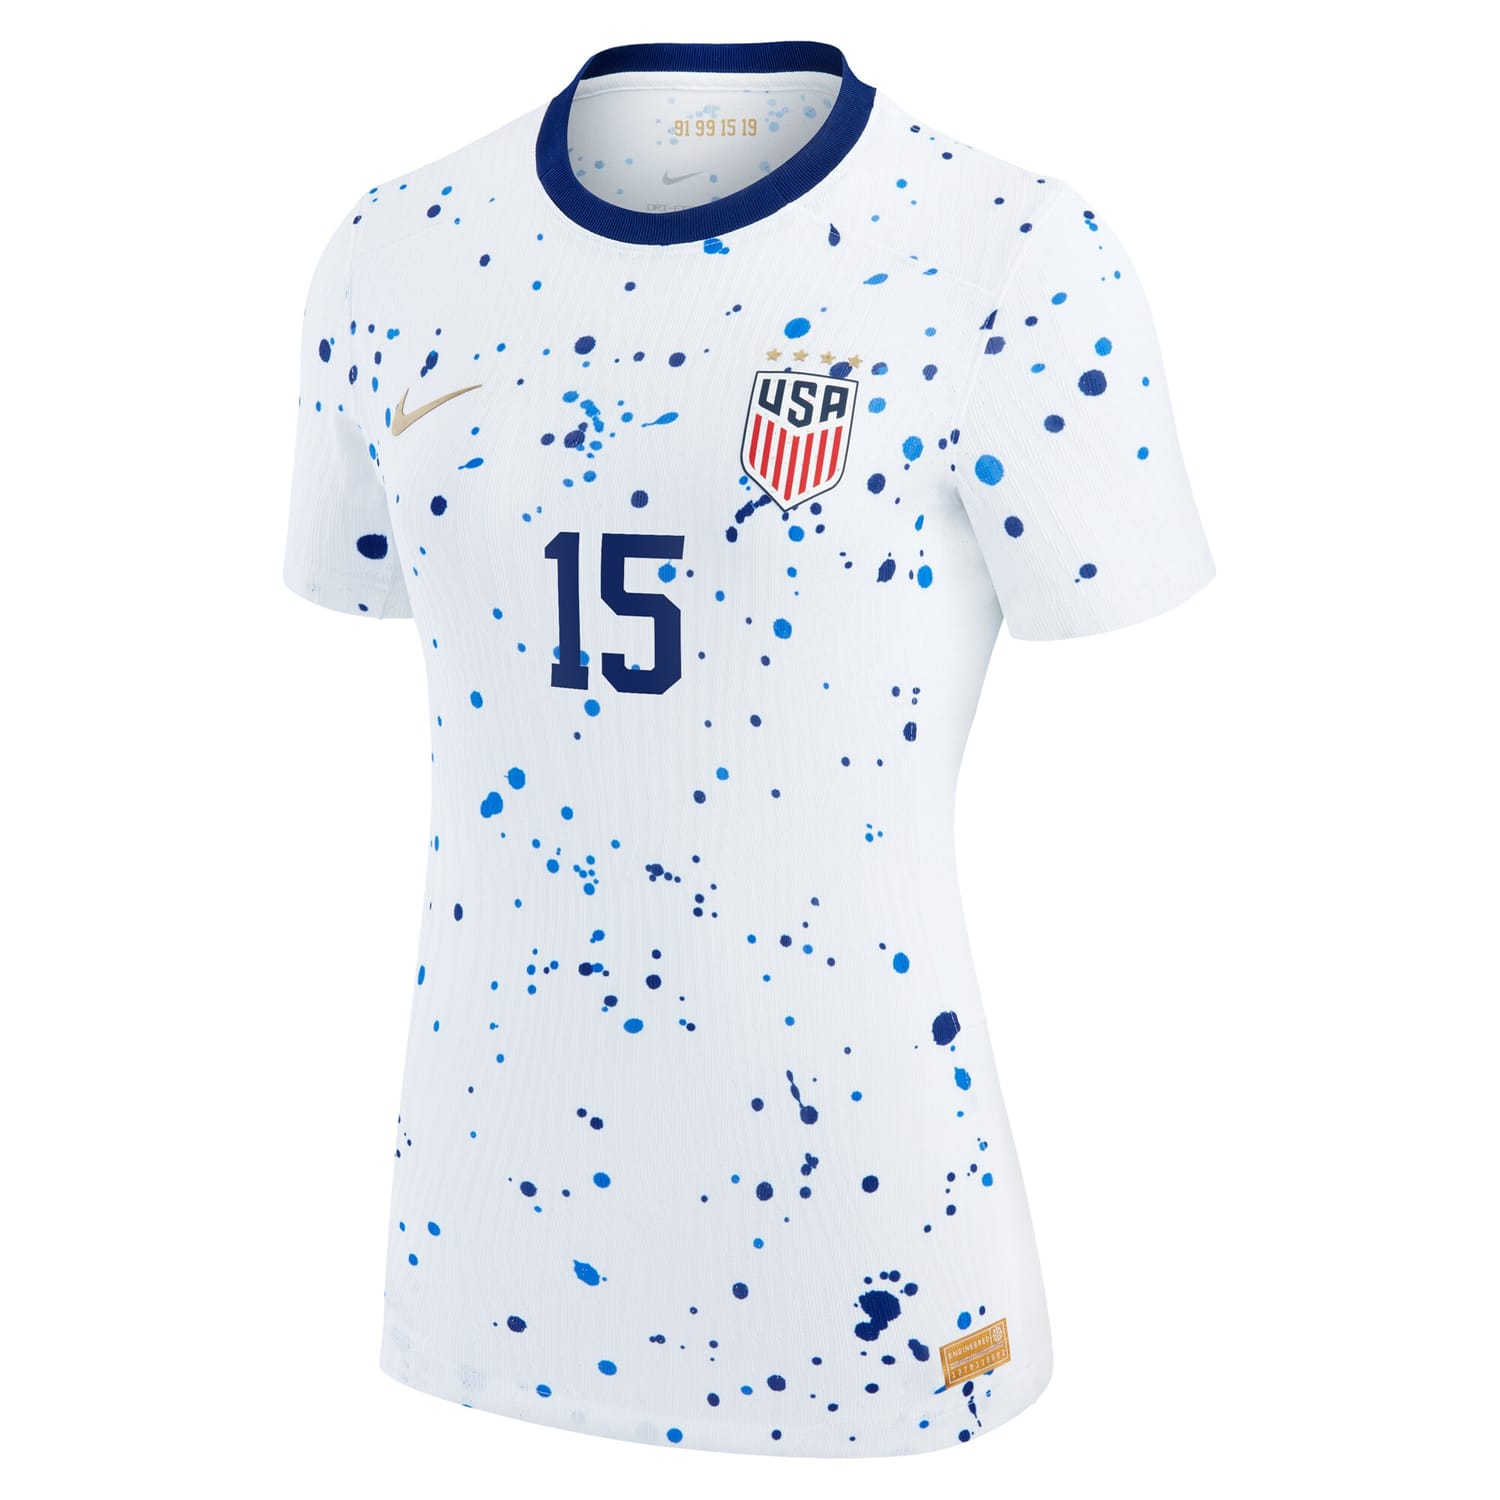 USWNT Home Authentic Jersey Shirt White 2023 player Megan Rapinoe printing for Women